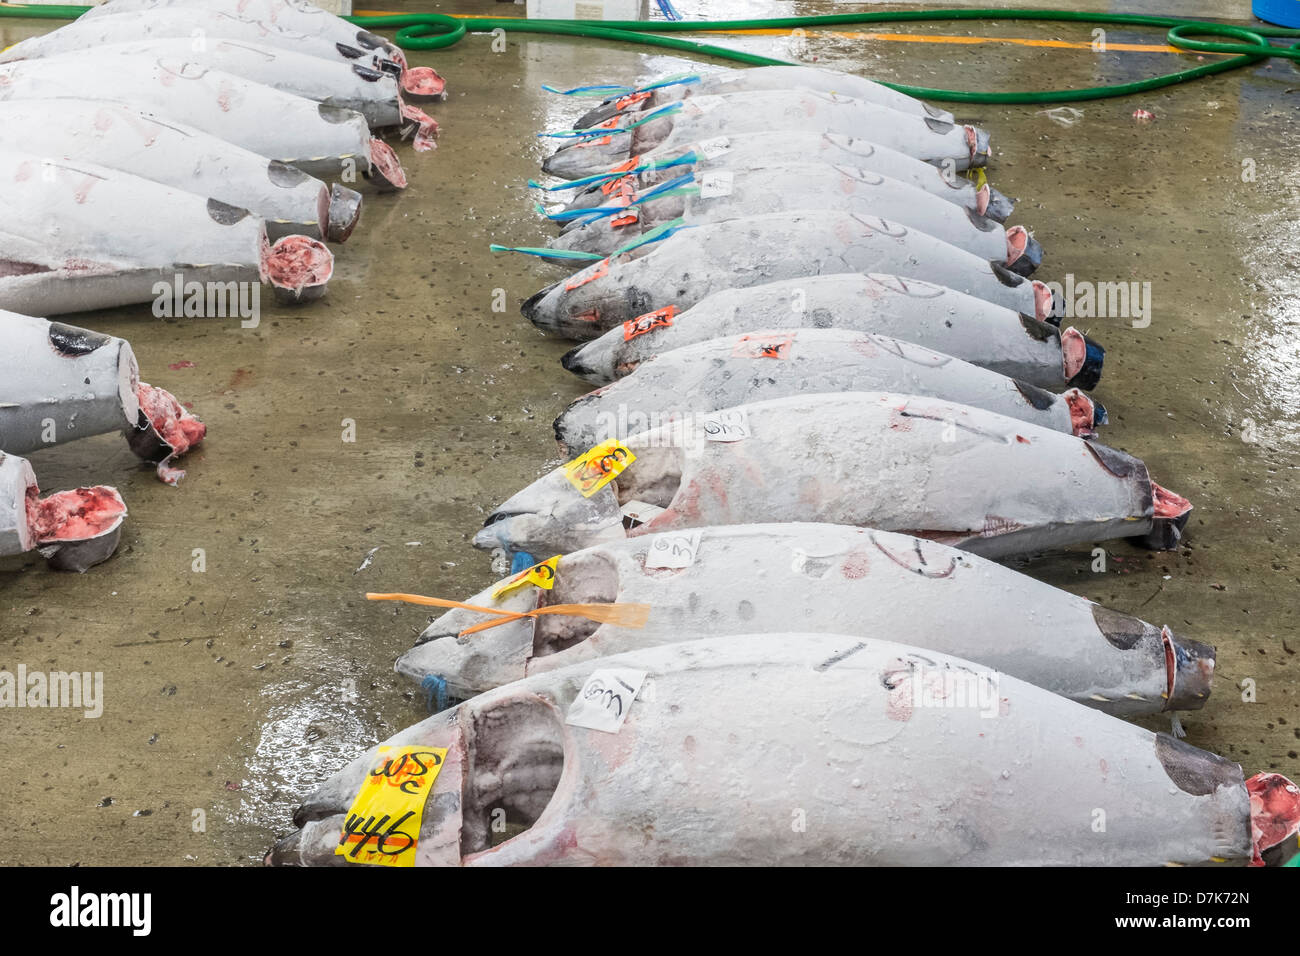 Large frozen tuna fish on floor of warehouse in the Tsukiji fish market, largest in the world, Tokyo, Japan Stock Photo